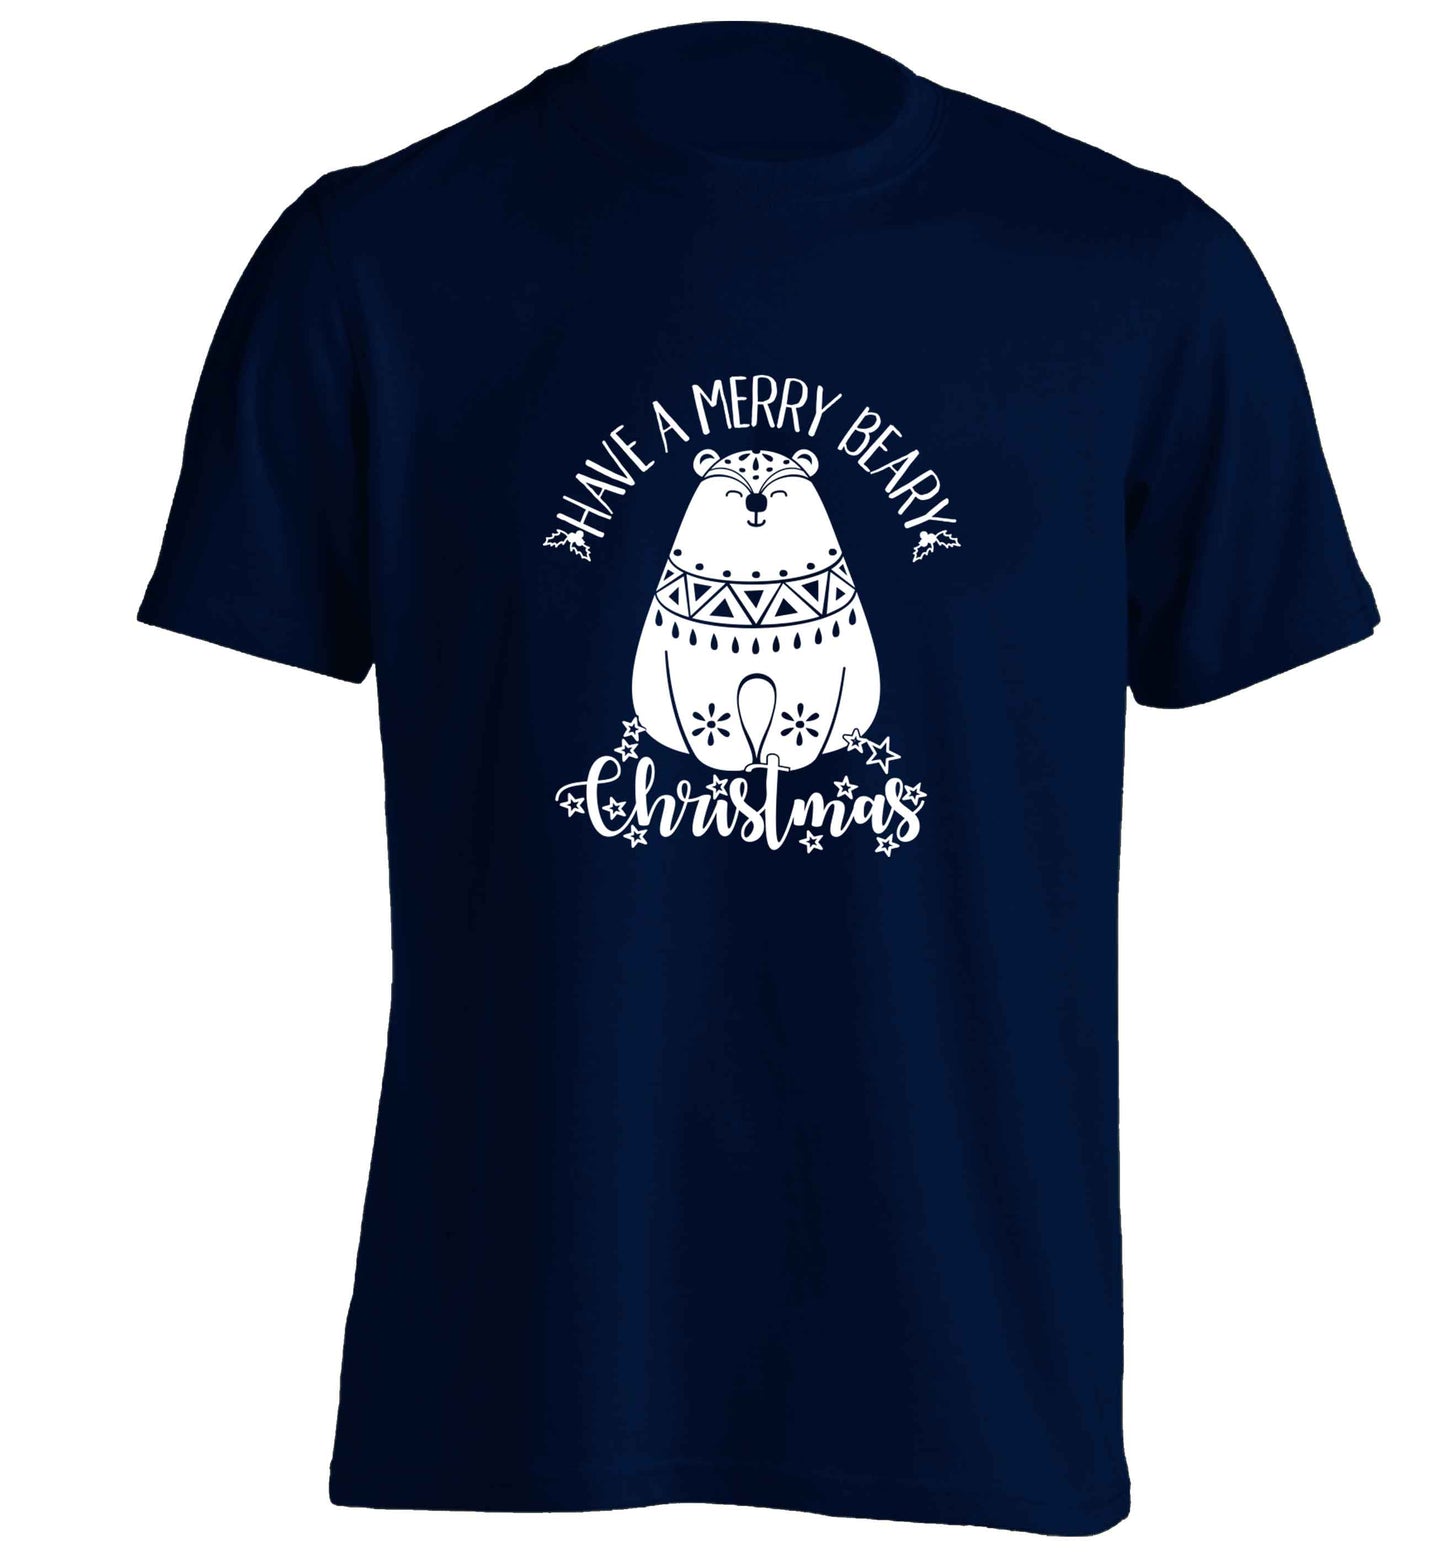 Have a merry beary Christmas adults unisex navy Tshirt 2XL